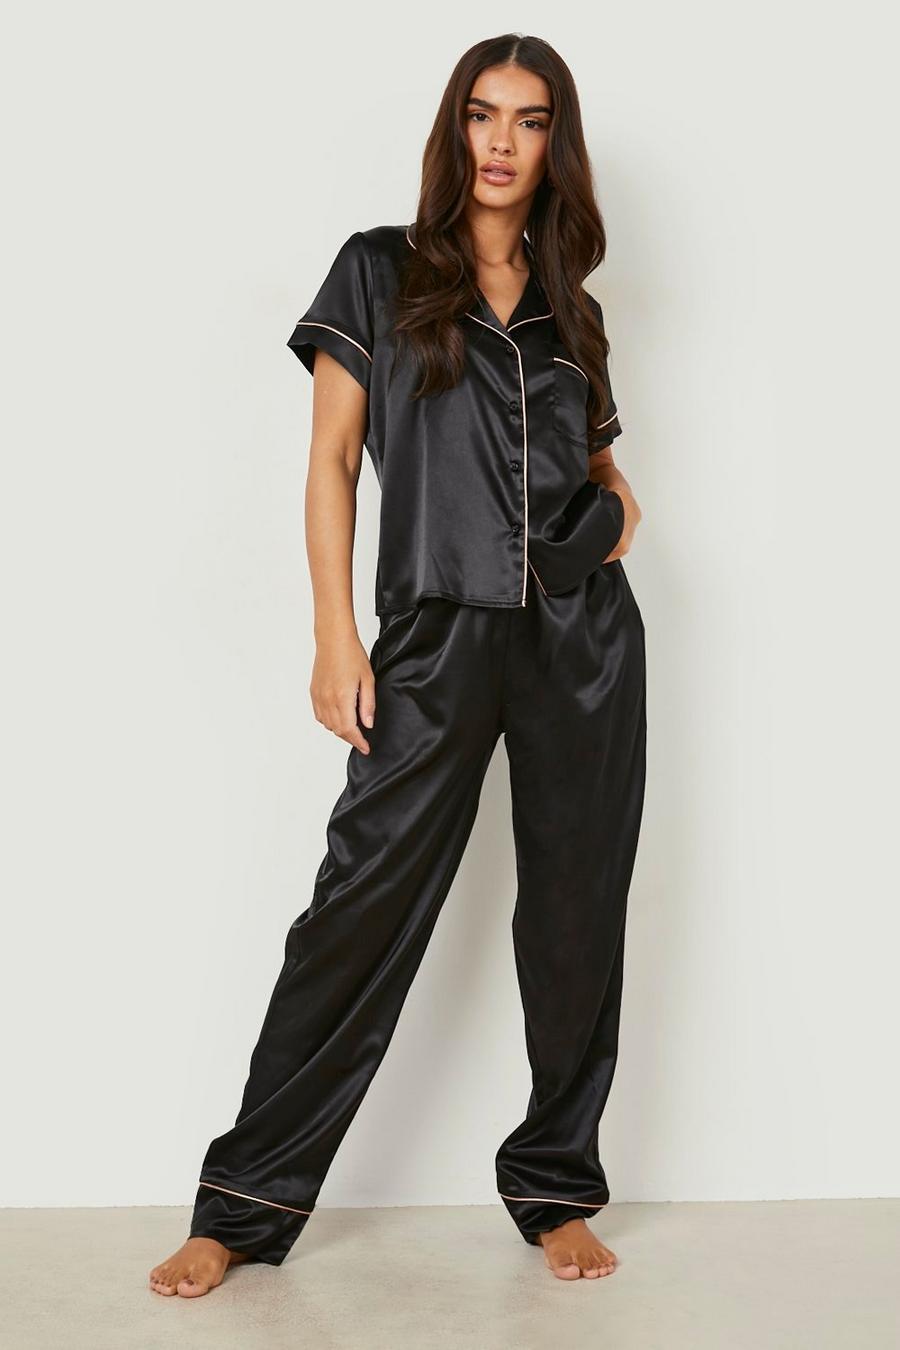 Satin Pj Trouser Set With Contrast Piping | boohoo